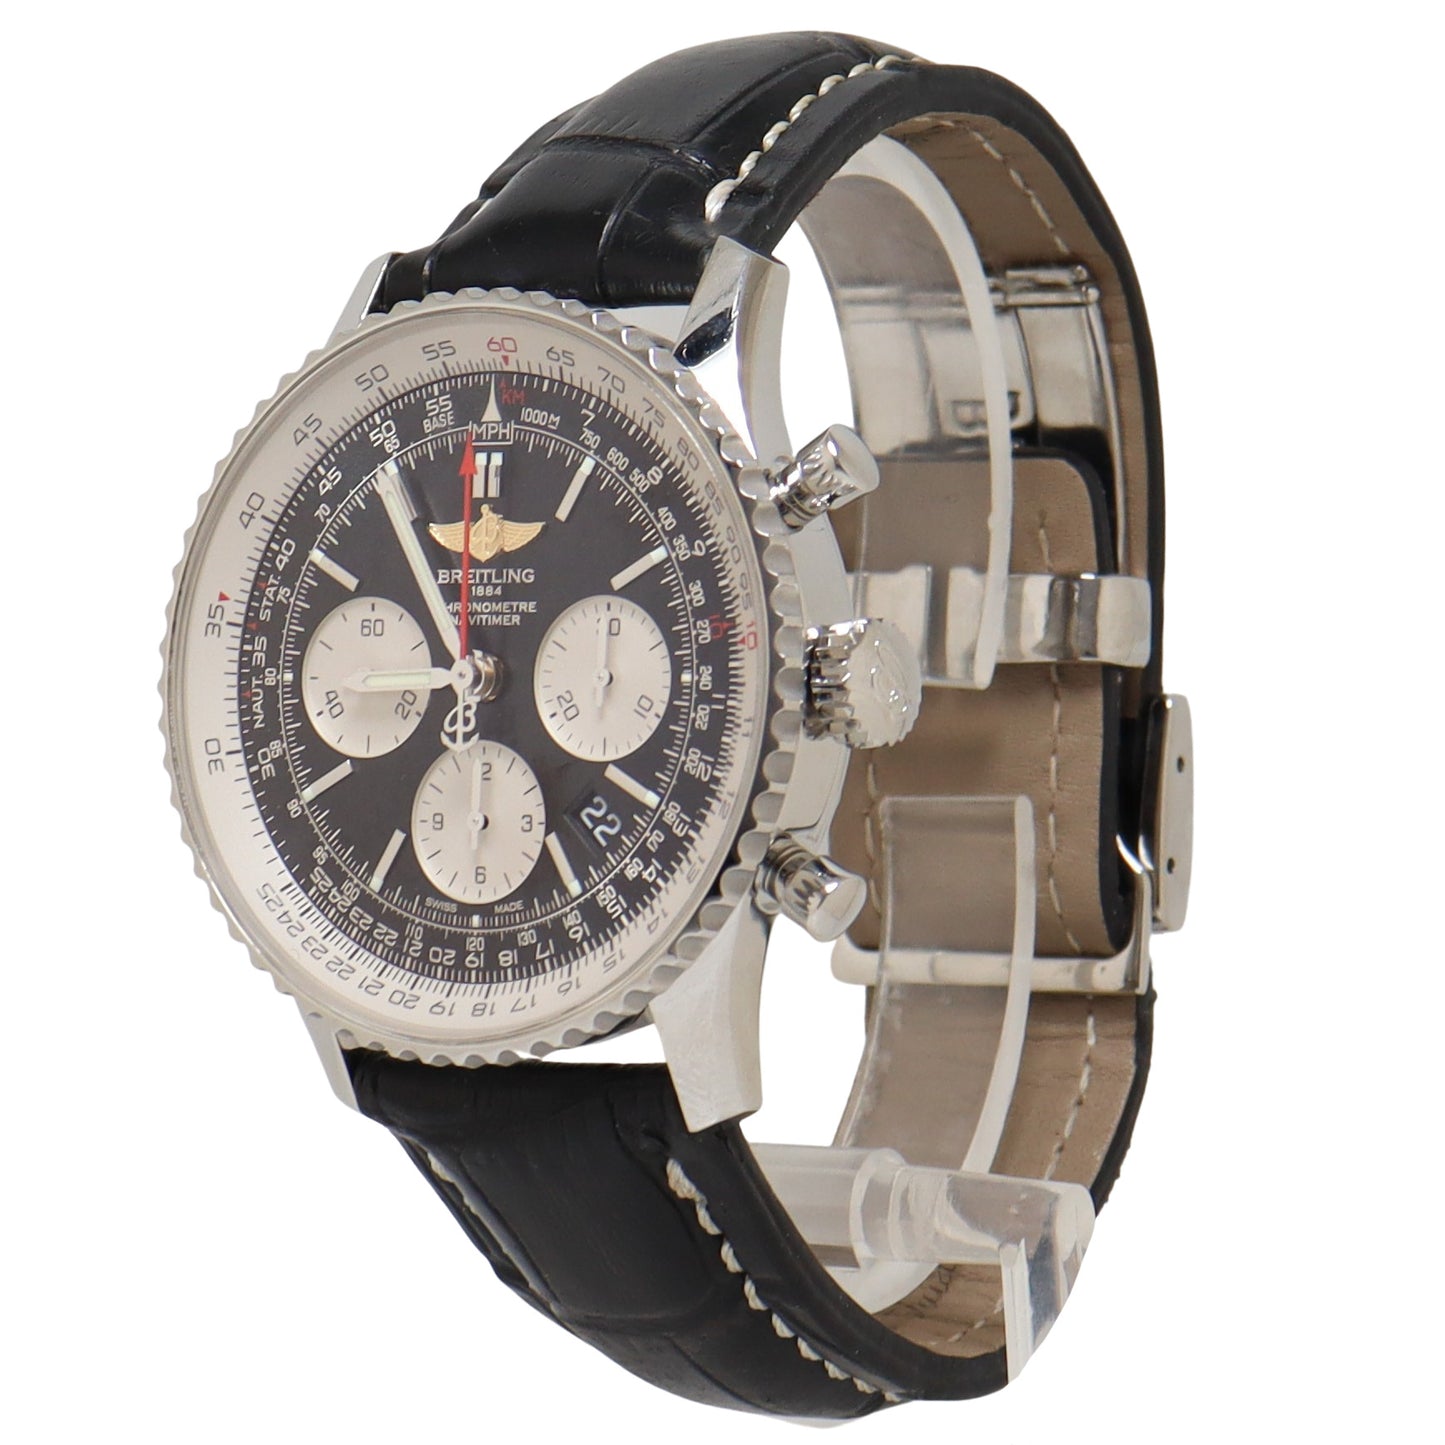 Breitling Navitimer Stainless Steel 43mm Black Chronograph Dial Watch Reference# AB0120 - Happy Jewelers Fine Jewelry Lifetime Warranty